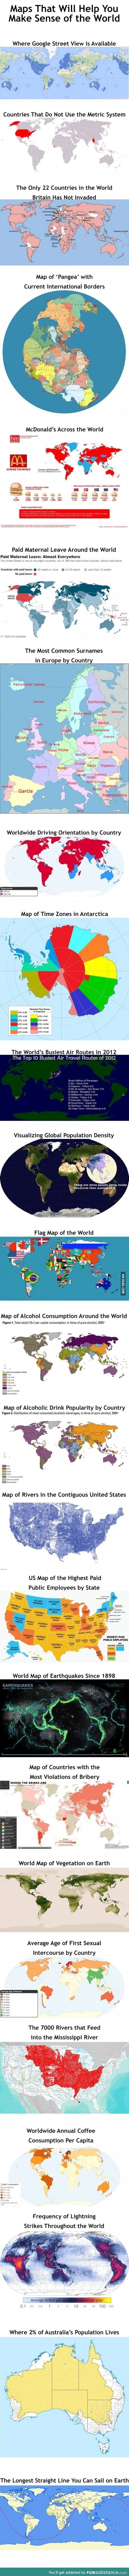 This will help you make sense of the world